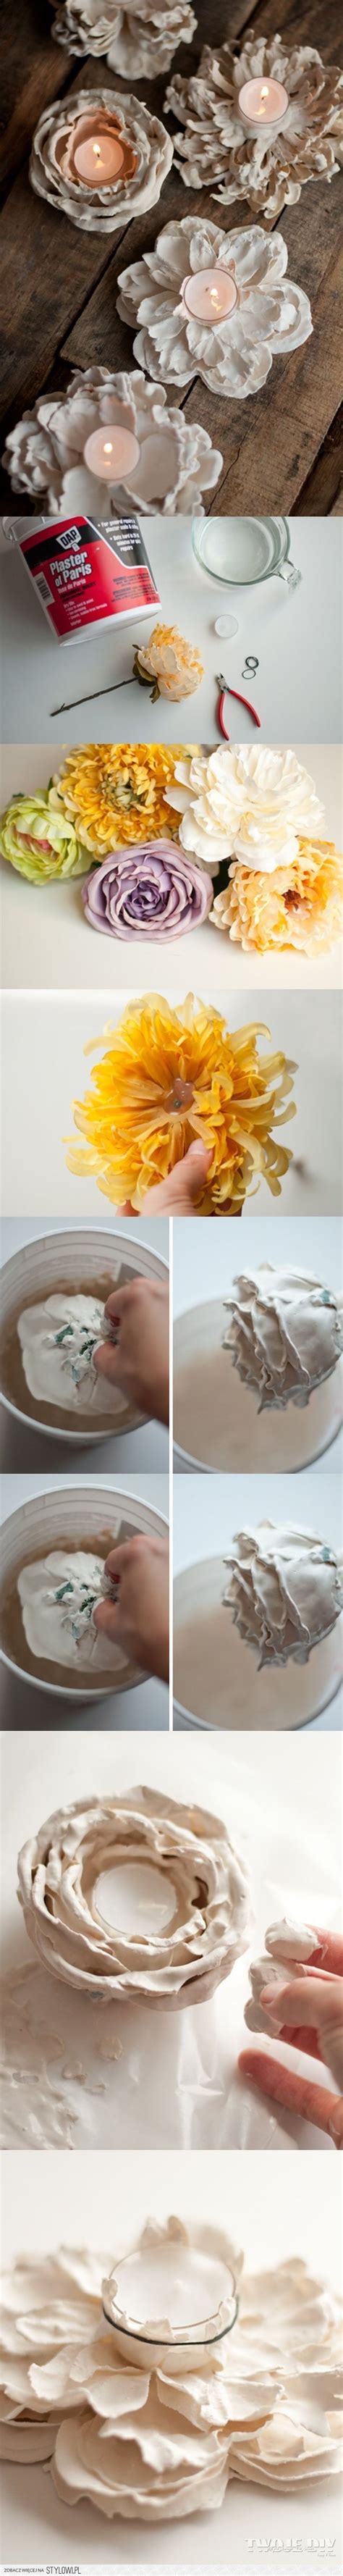 Diy Romantic Plaster Dipped Flower Votives I Cant Believe How Easy It